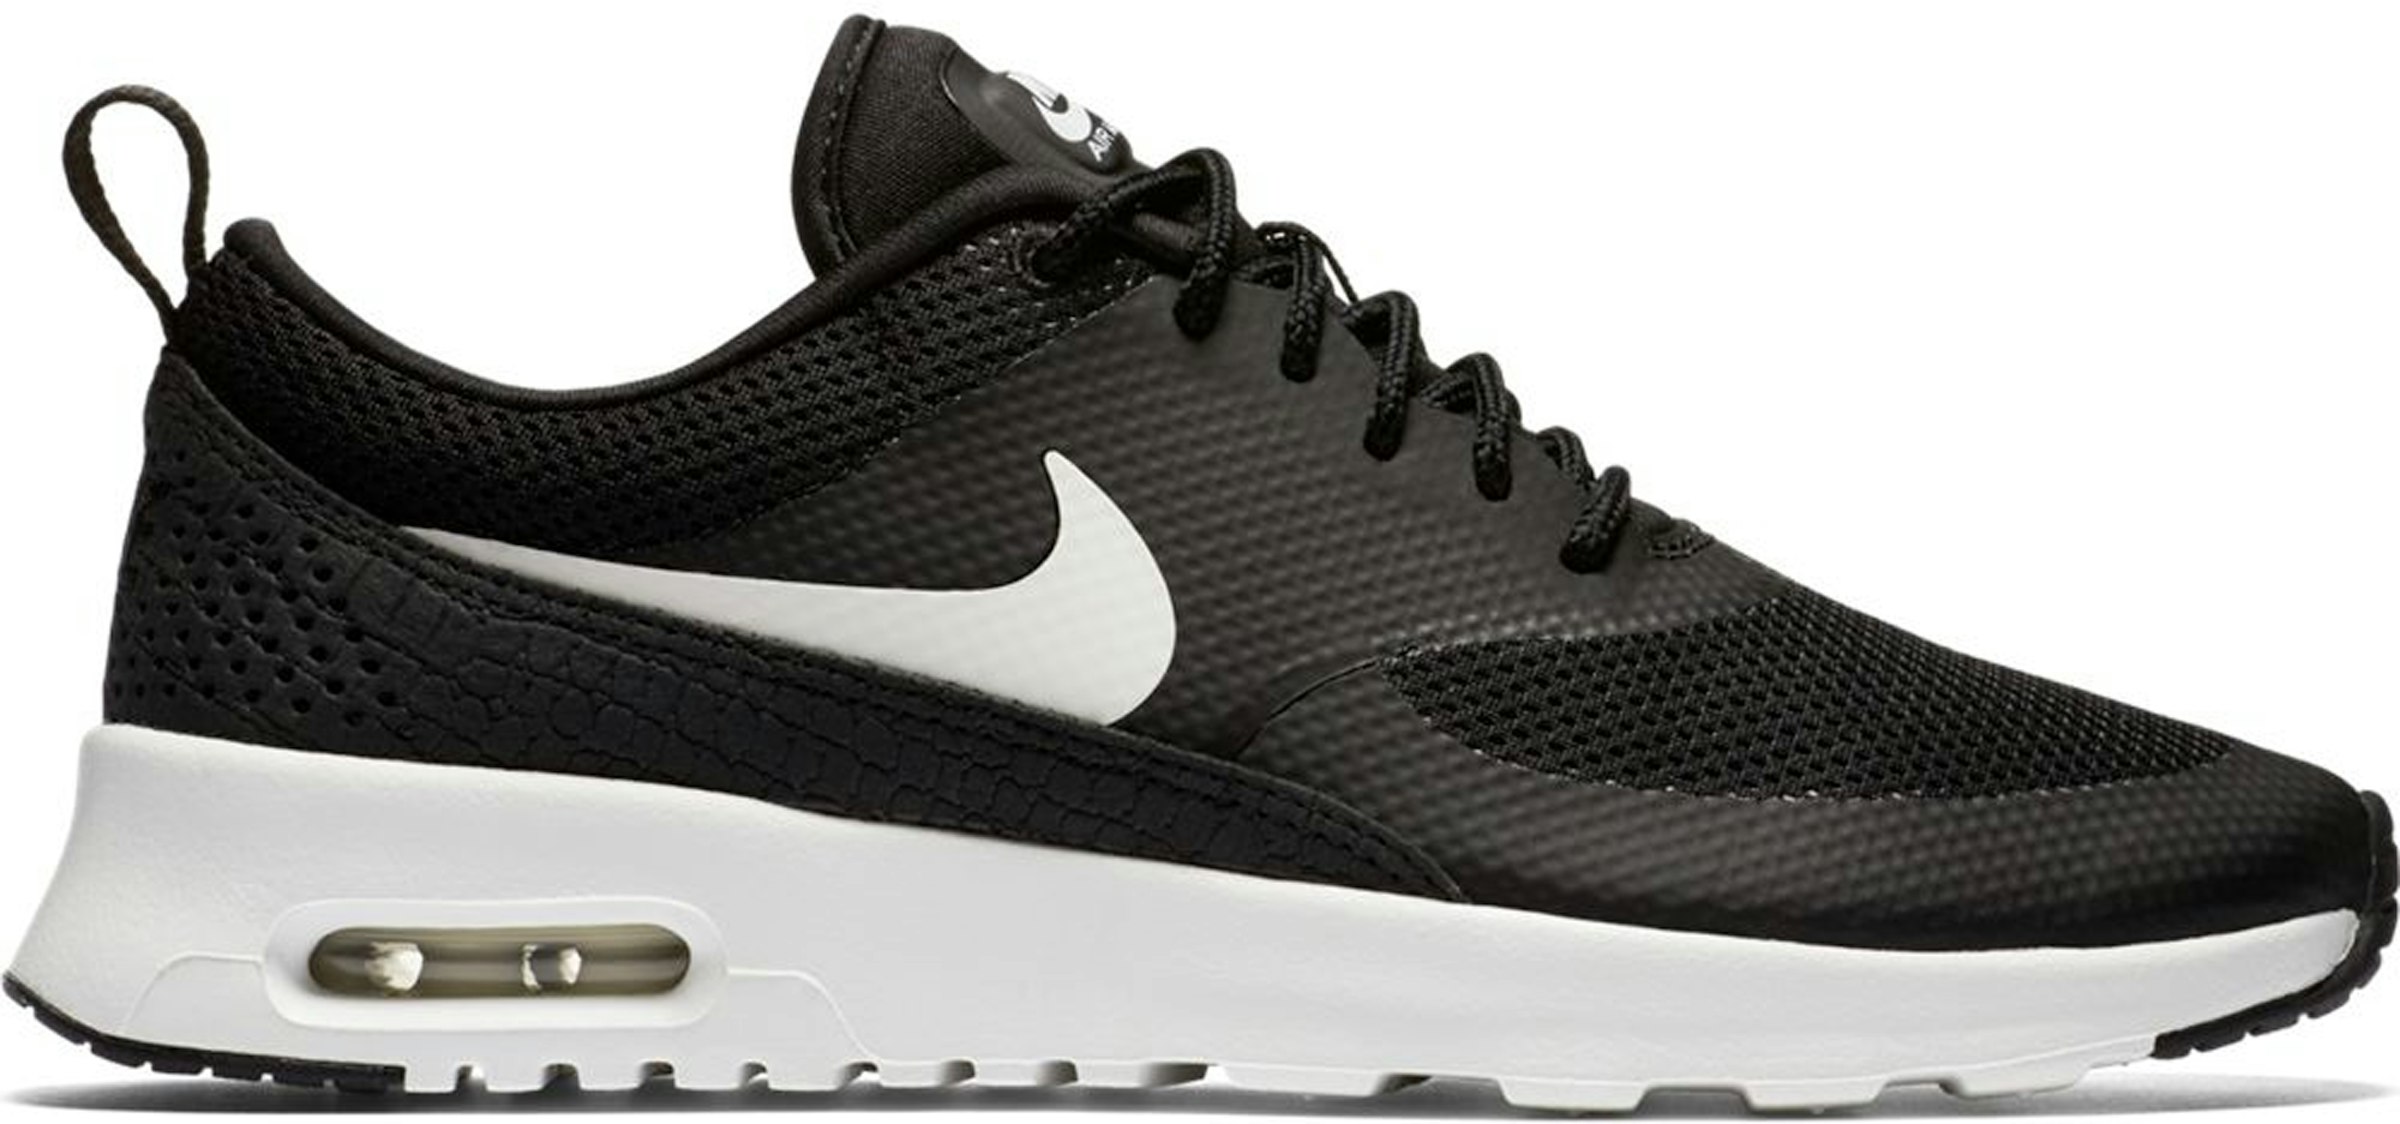 Conquistar Bungalow Martin Luther King Junior Nike Air Max Thea Black White (Women's) - 599409-020 - US